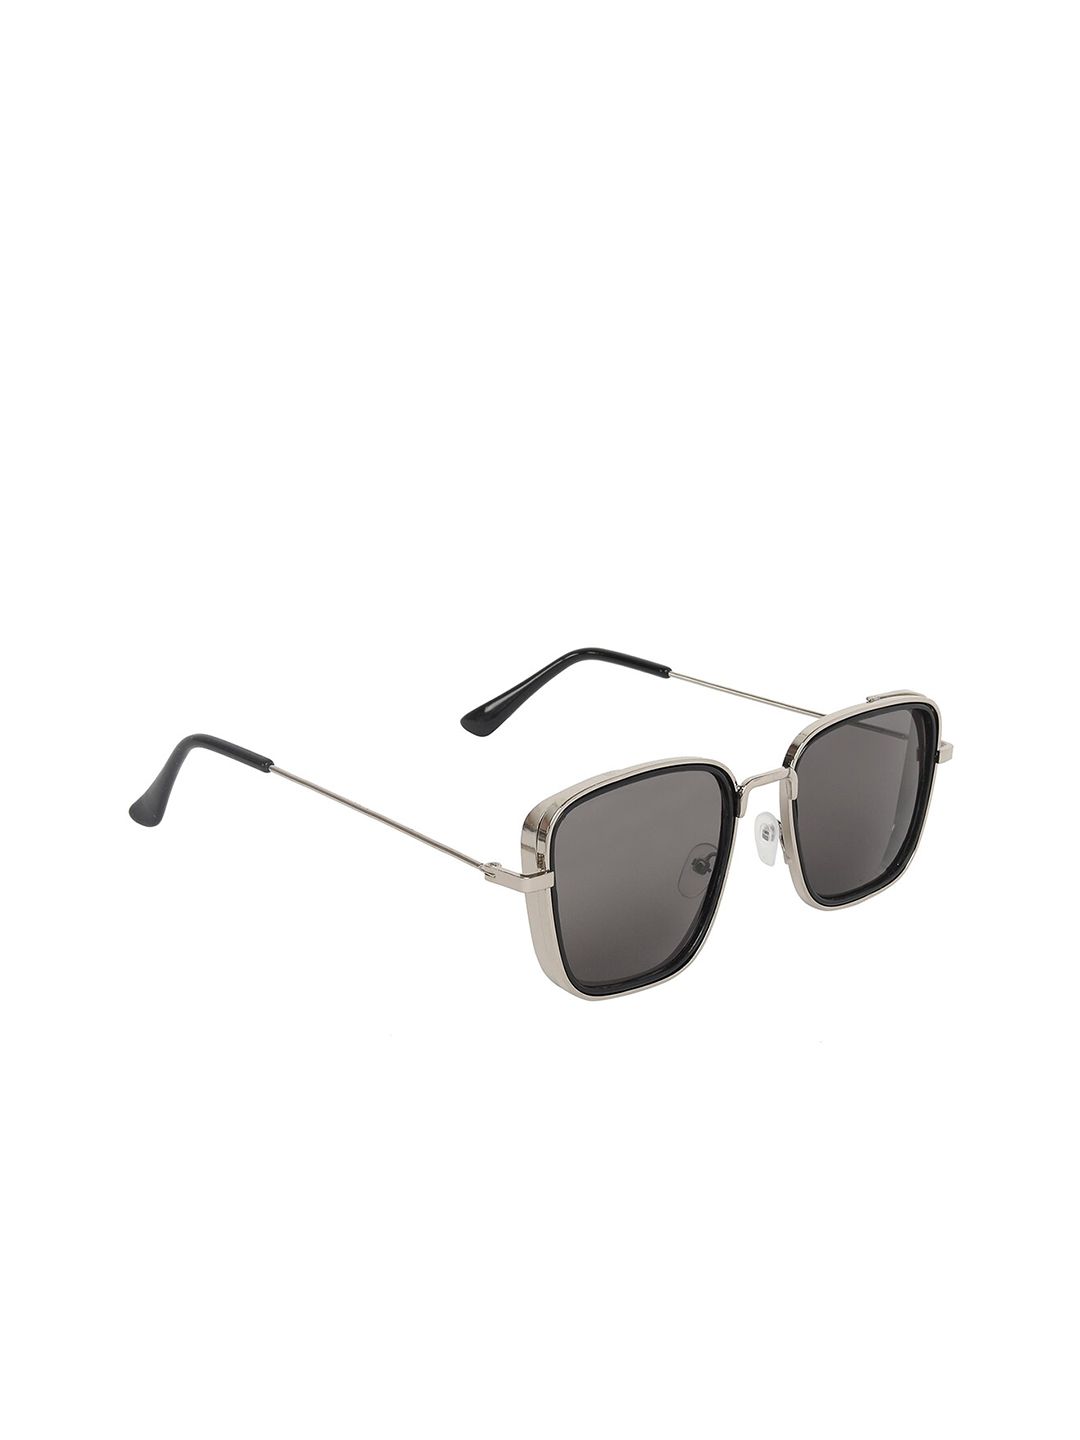 CRIBA Unisex Black Lens & Gunmetal-Toned Rectangle Sunglasses with UV Protected Lens Price in India